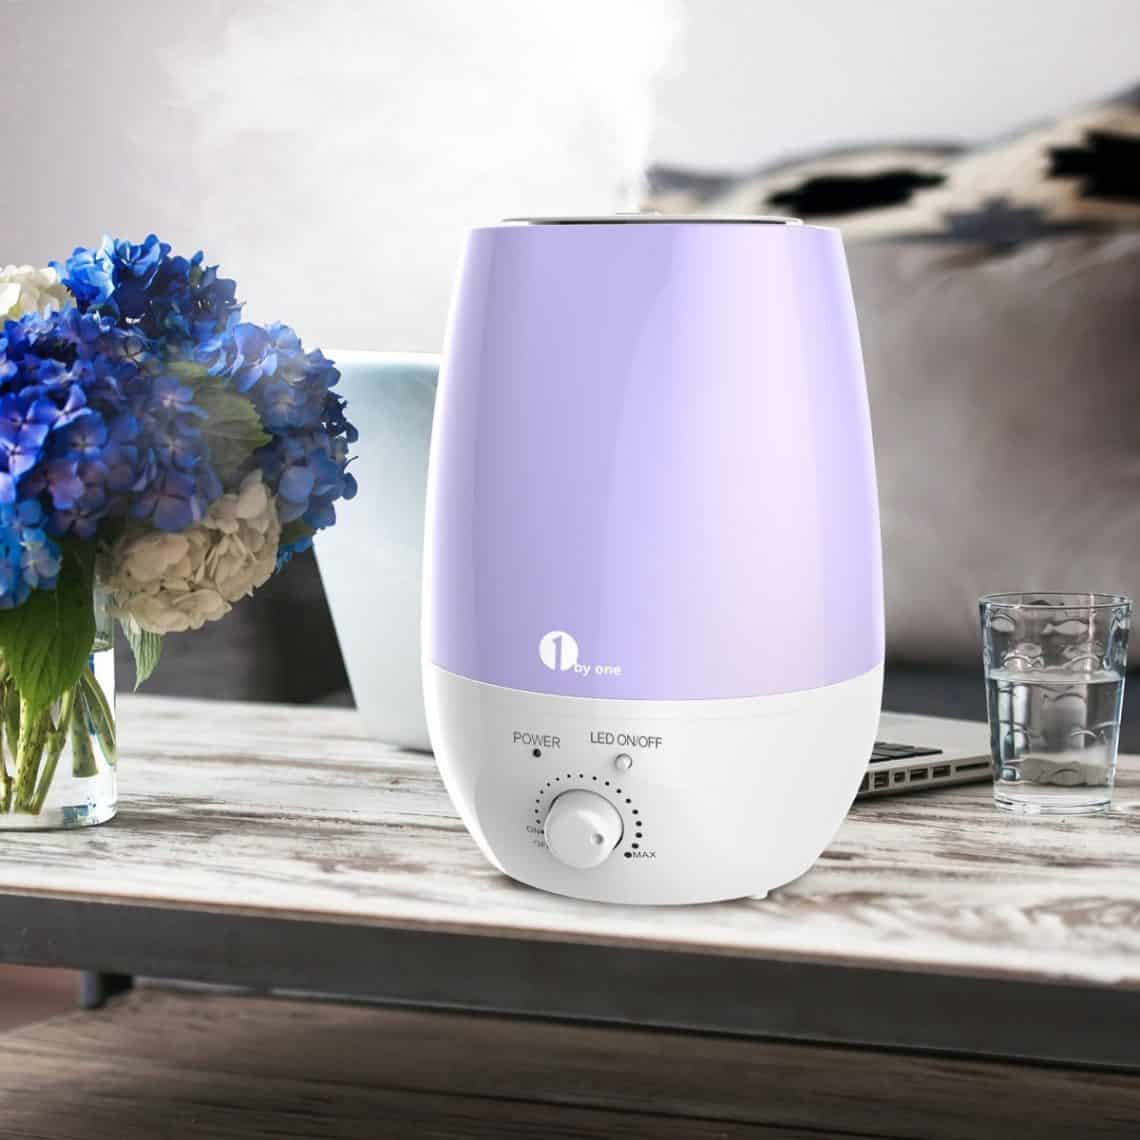 humidifier for bedroom